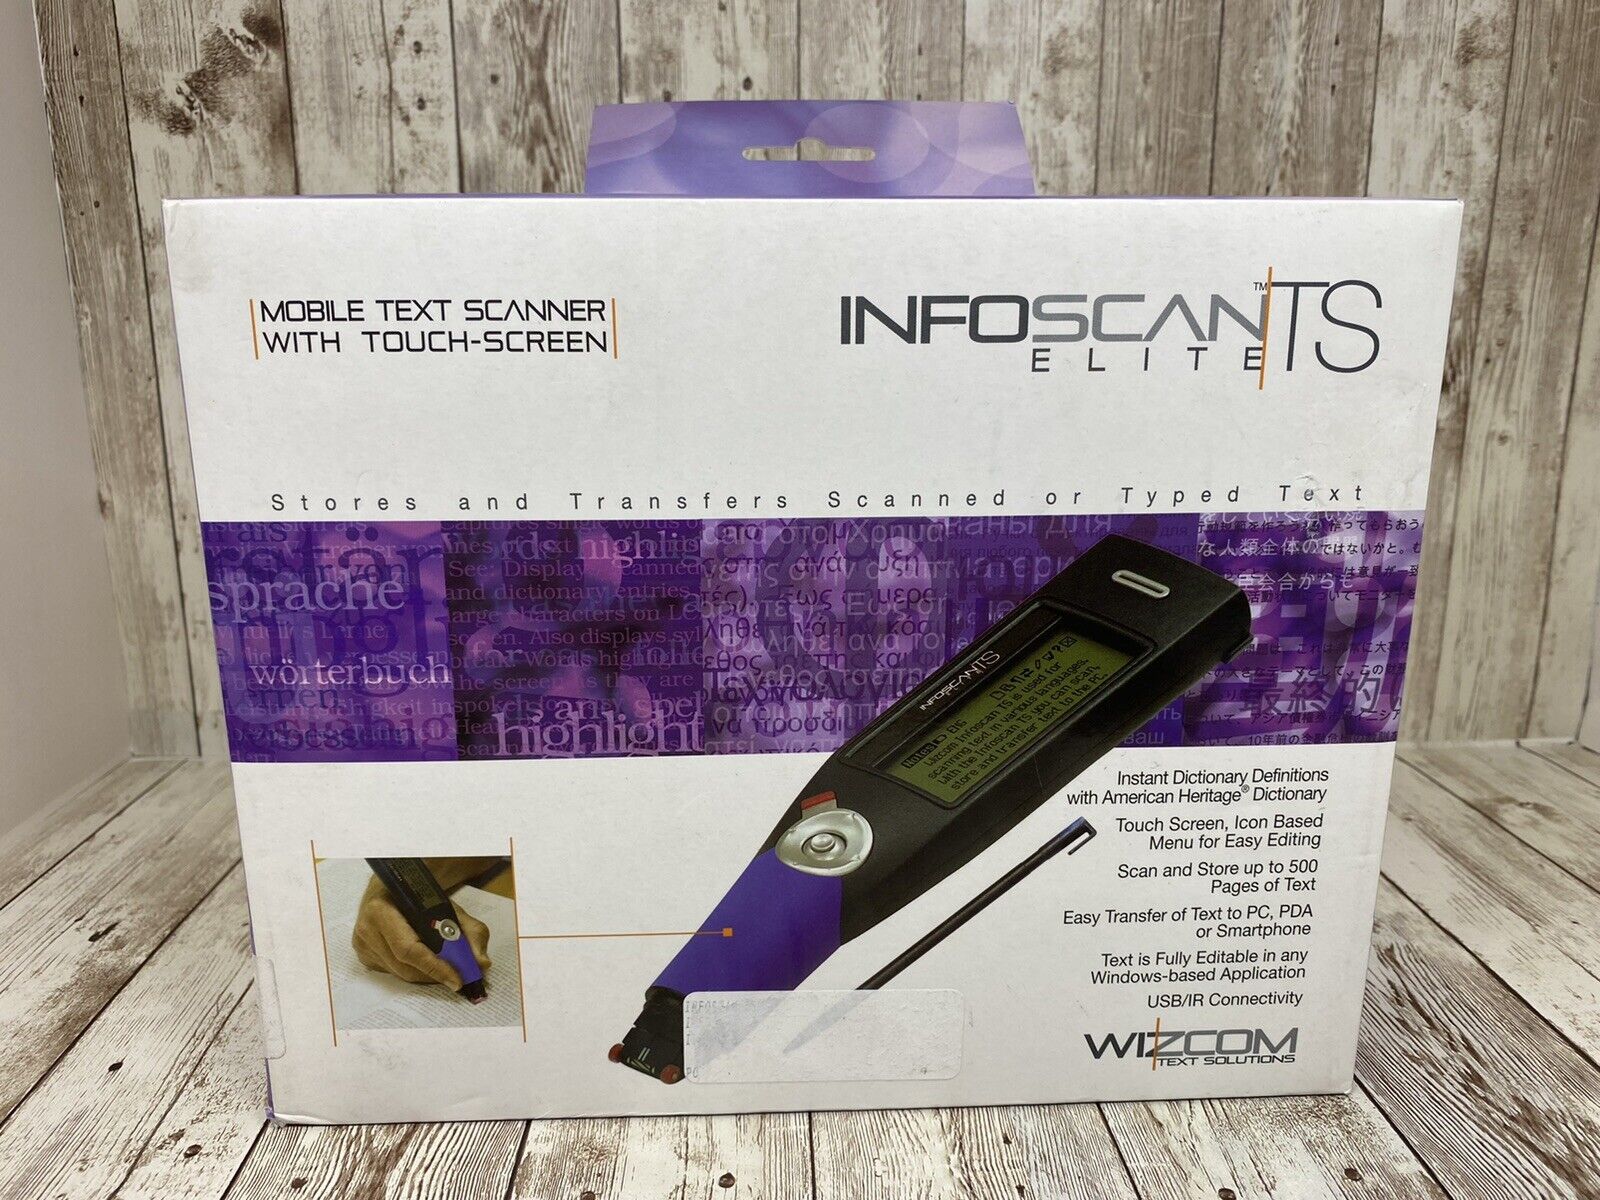 NEW SEALED WIZCOM INFOSCAN TS ELITE  MOBILE TEXT SCANNER WITH TOUCH SCREEN